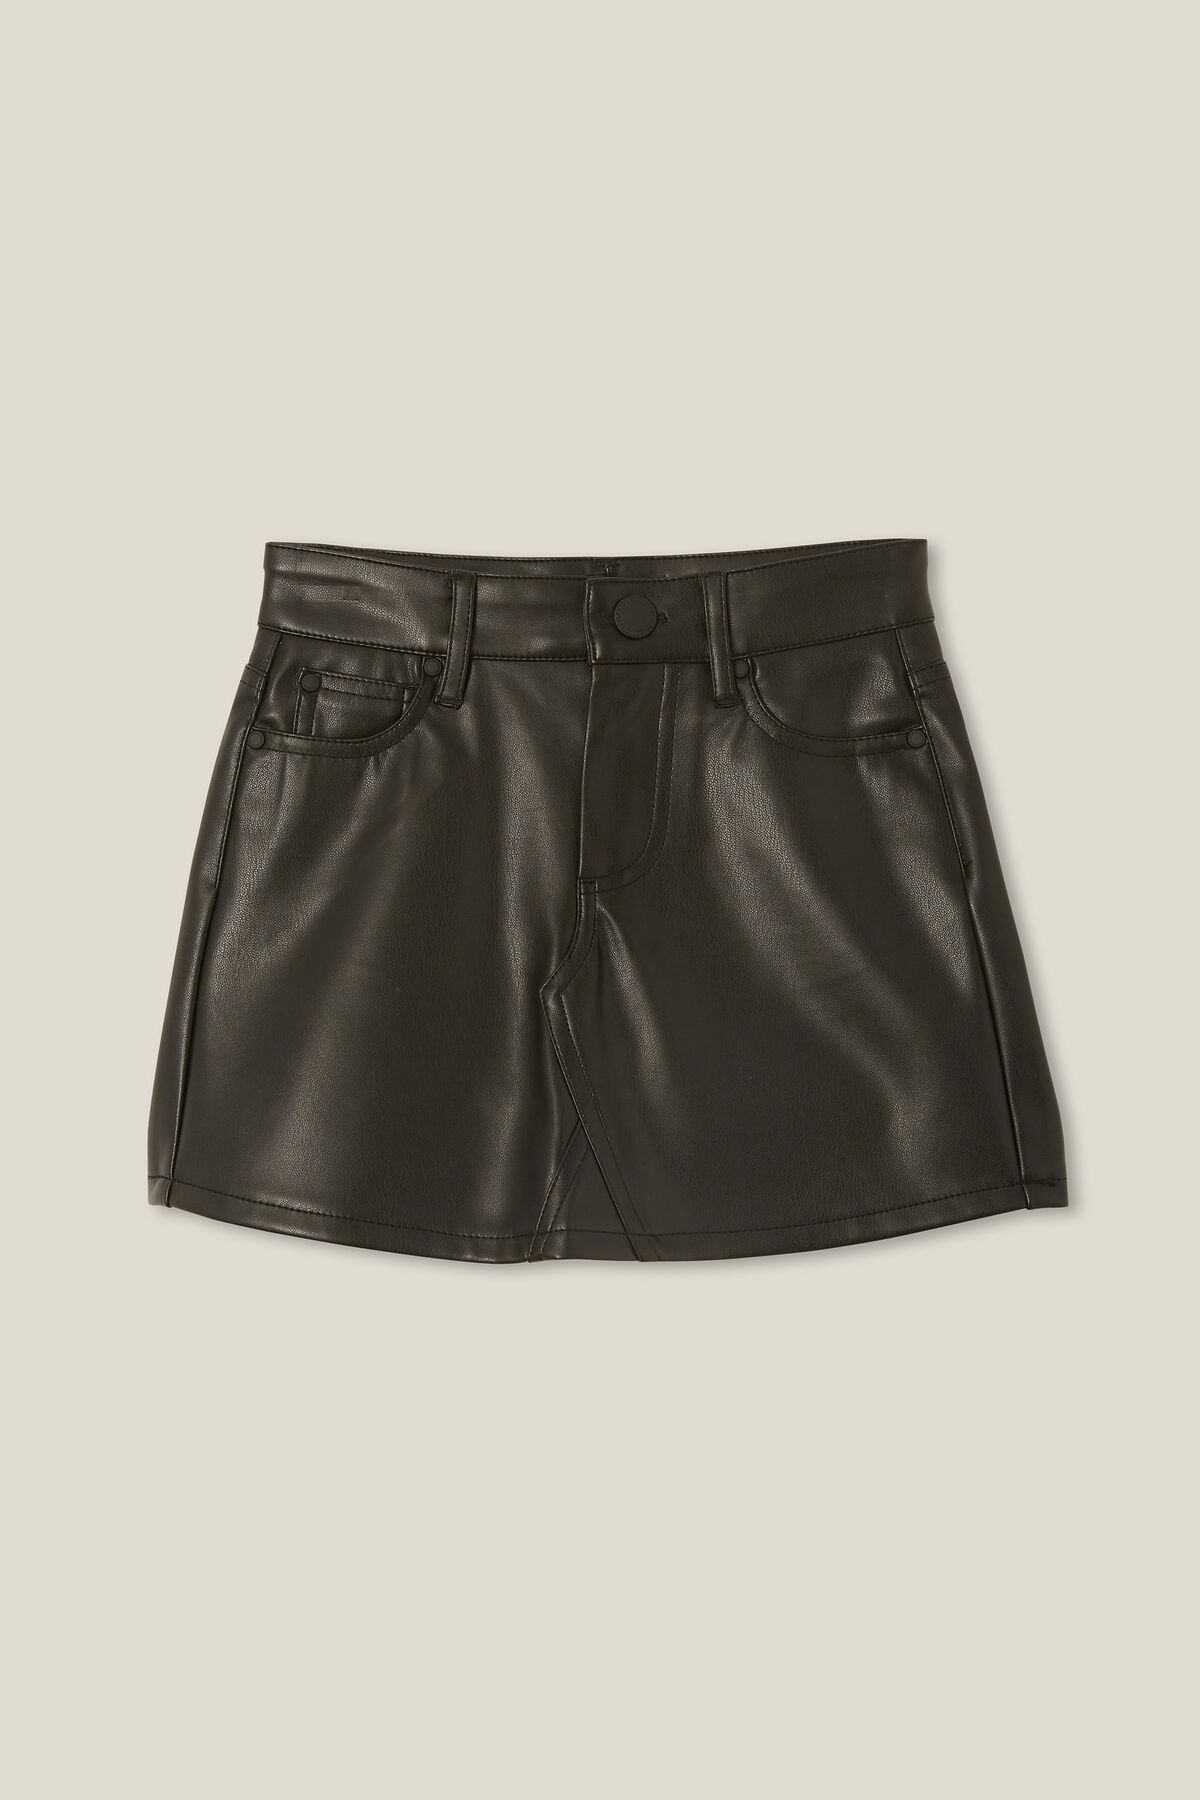 Nelly Vegan Leather Skirt | Cotton On (US)